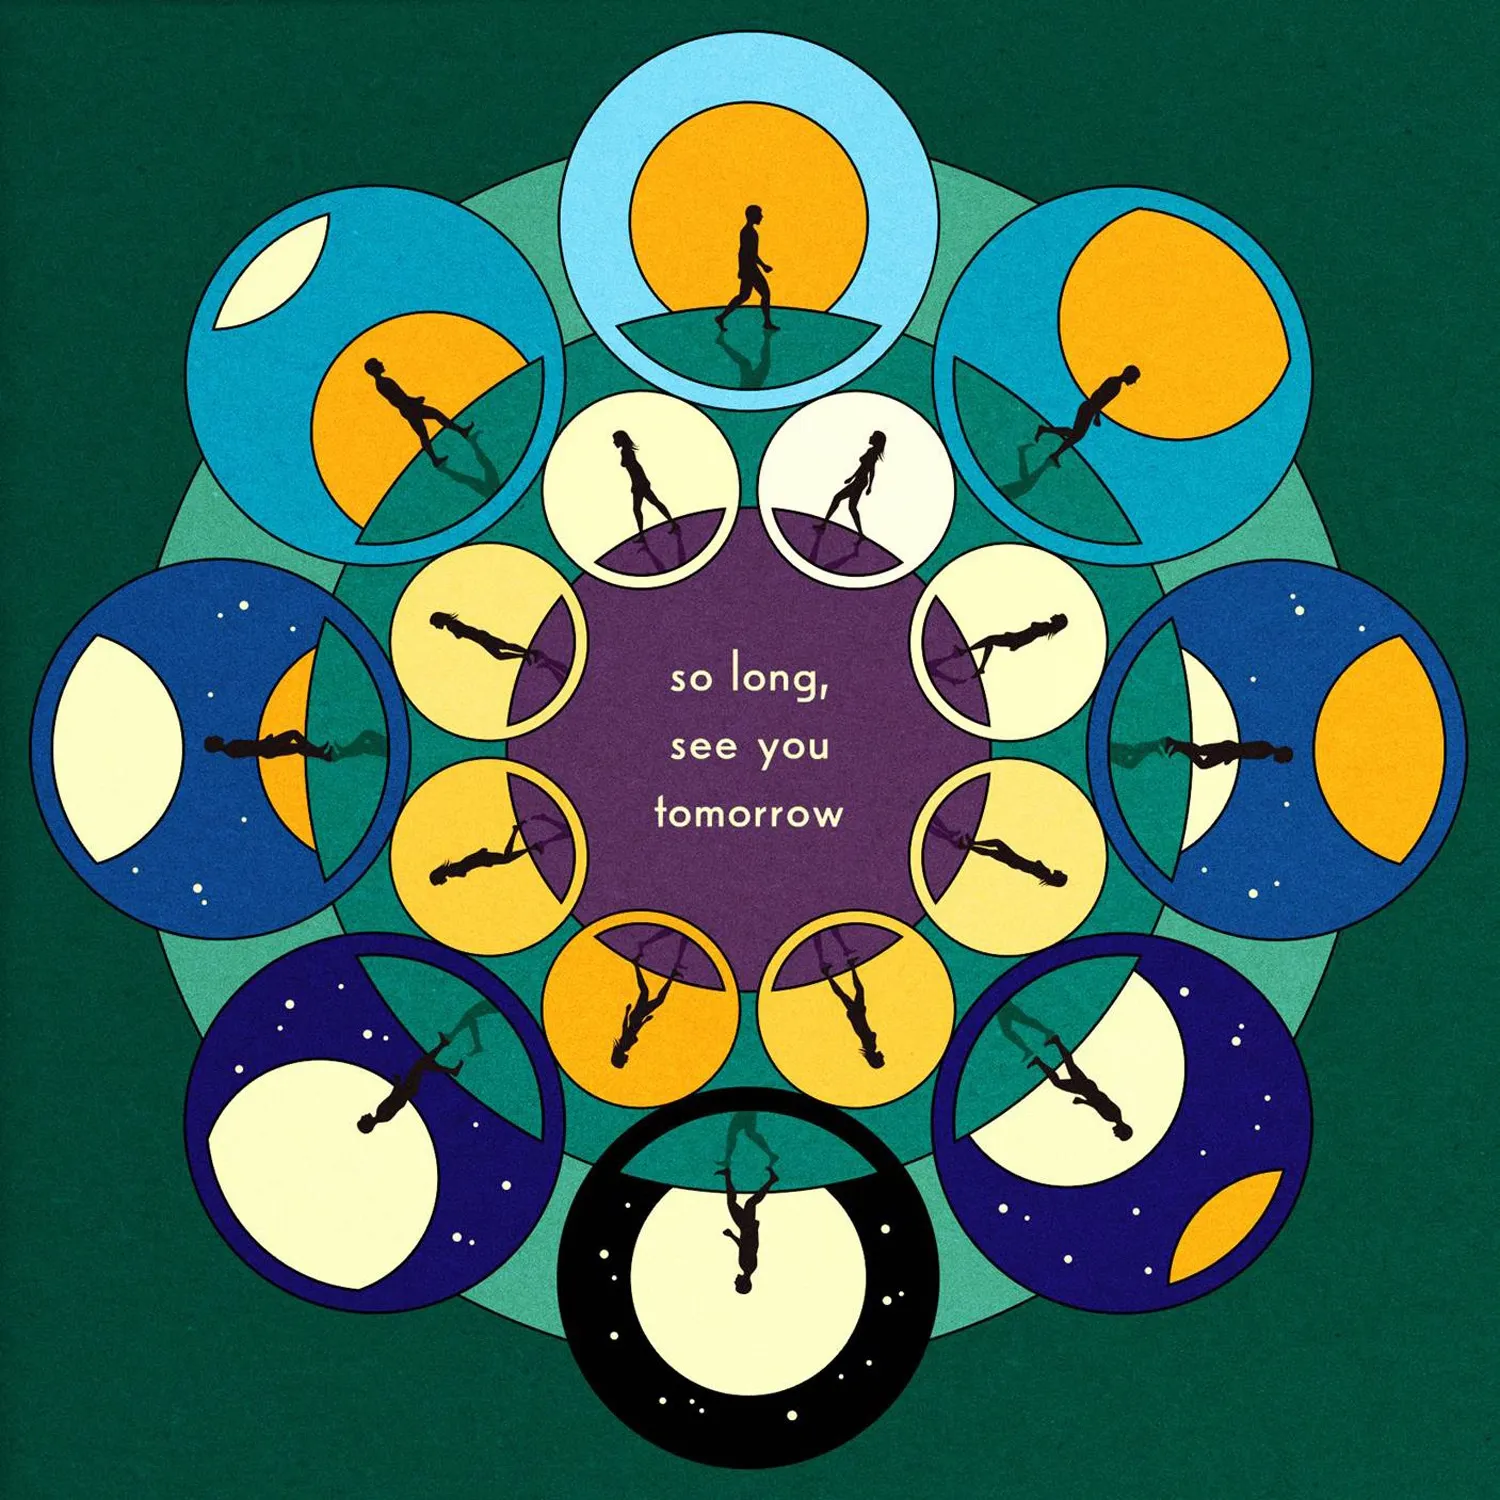 <strong>Bombay Bicycle Club - So Long, See You Tomorrow</strong> (Vinyl LP - black)